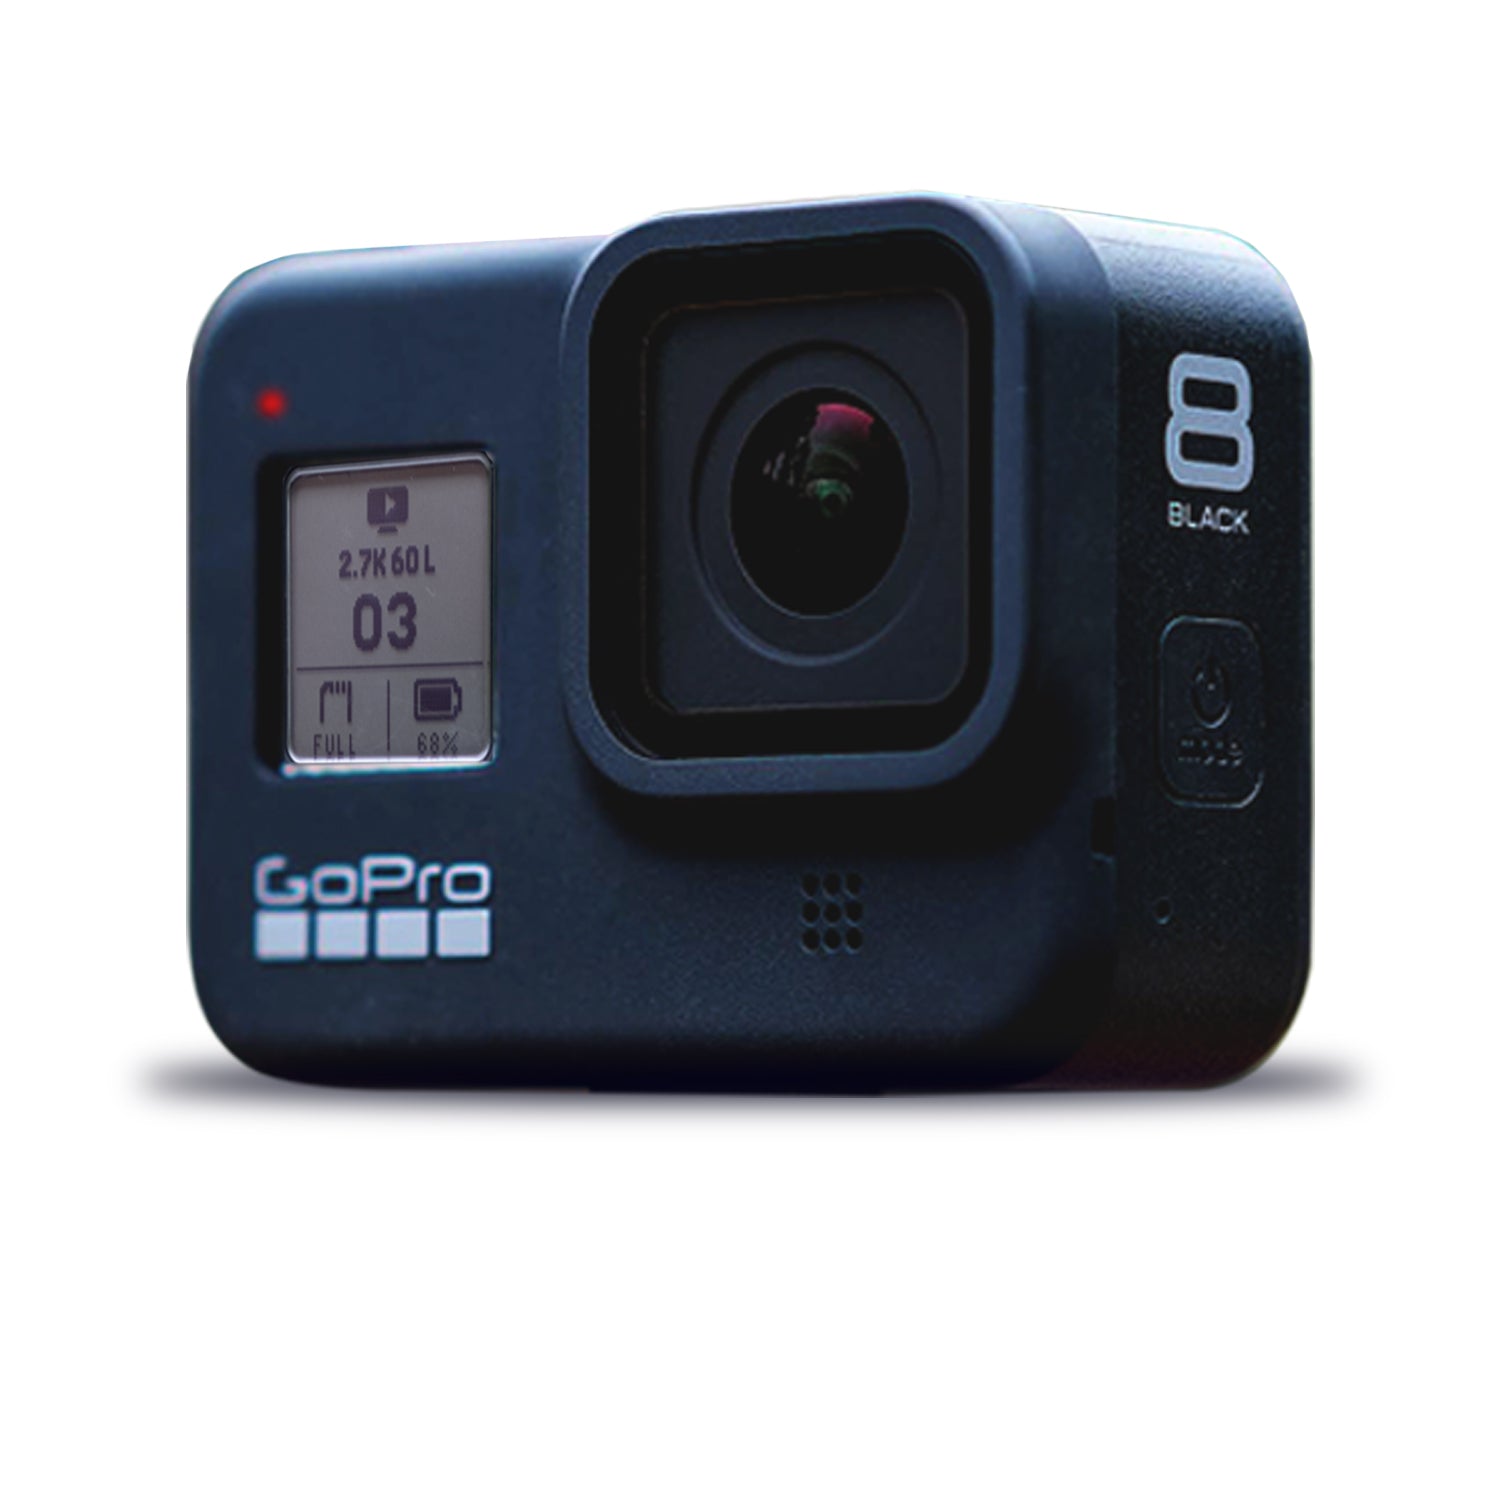 GoPro HERO8 Black Digital Action Camera - With Clean and Care Set + 64GB Memory Card and More.